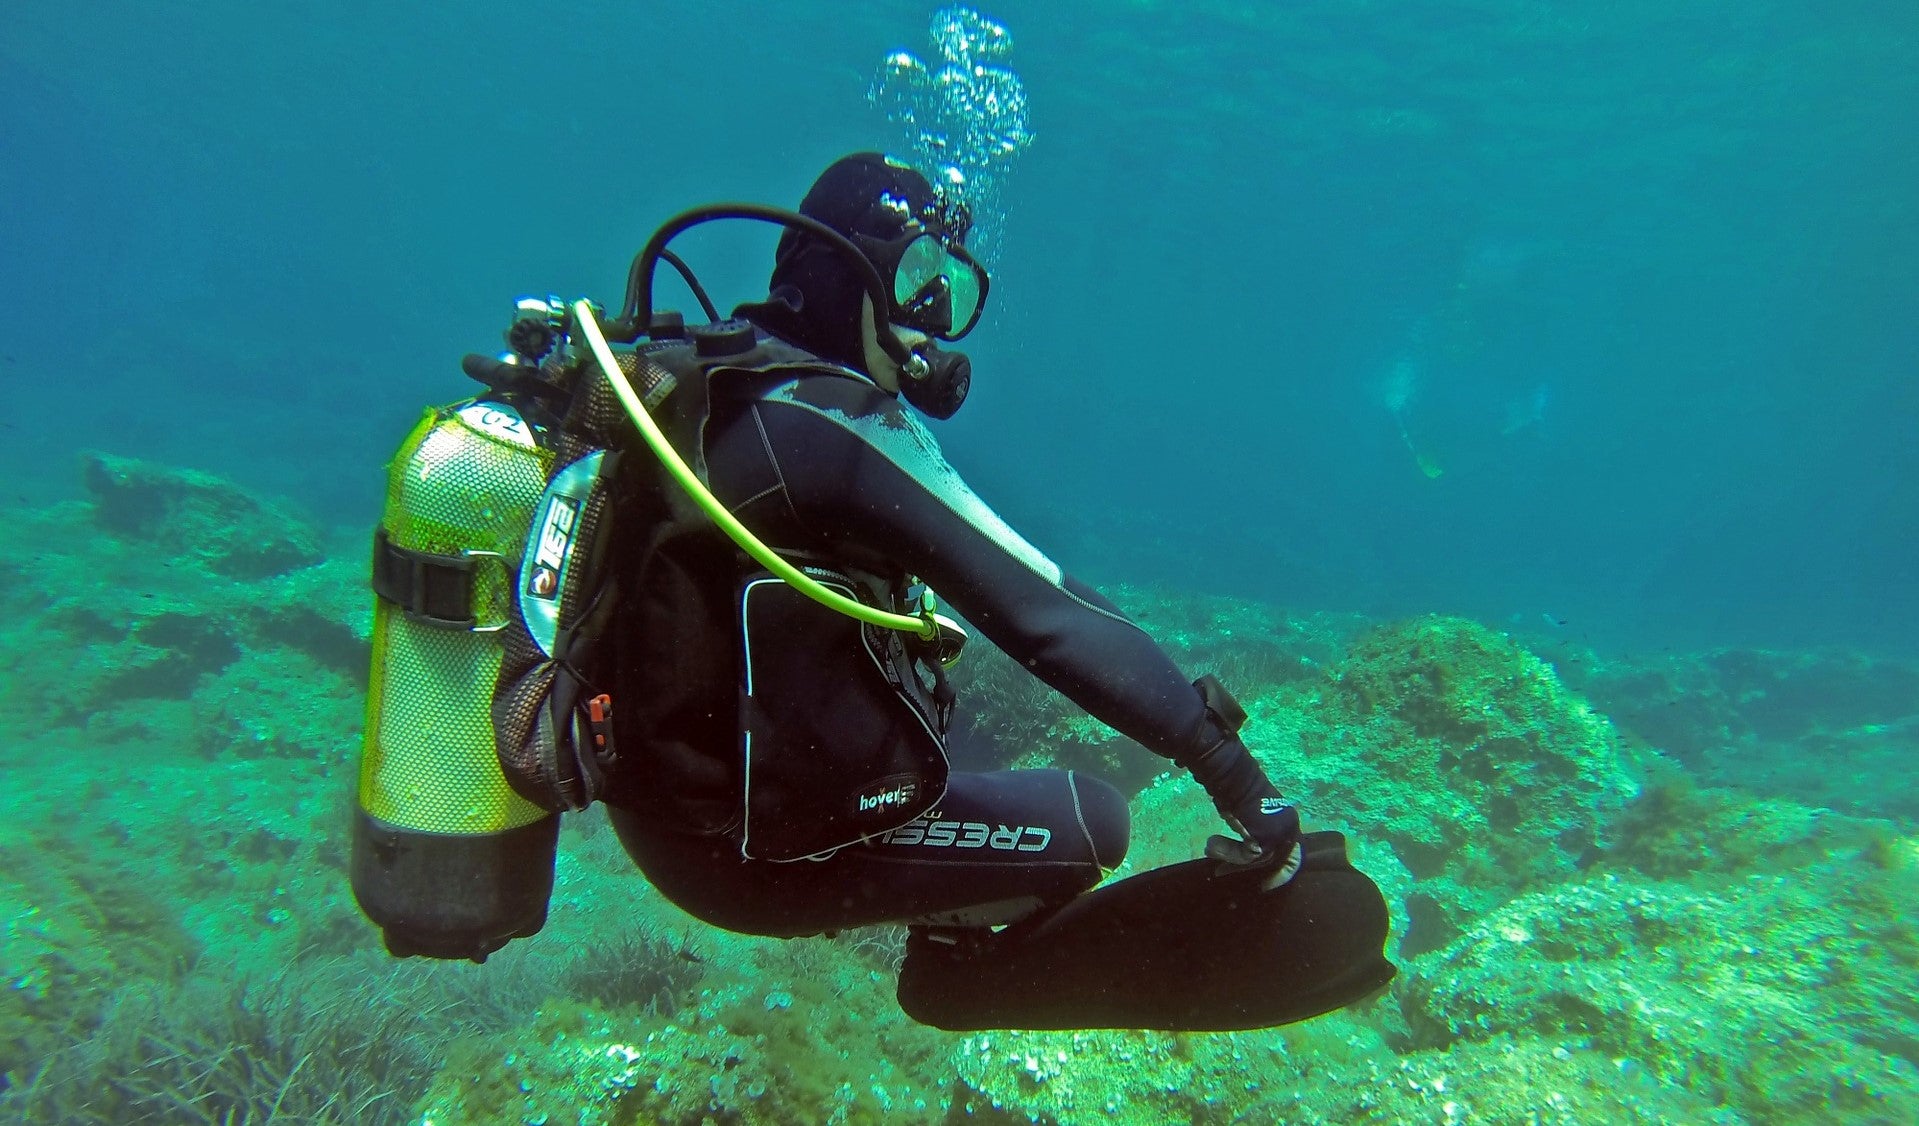 The Ultimate Guide to Freediving Weight Belts